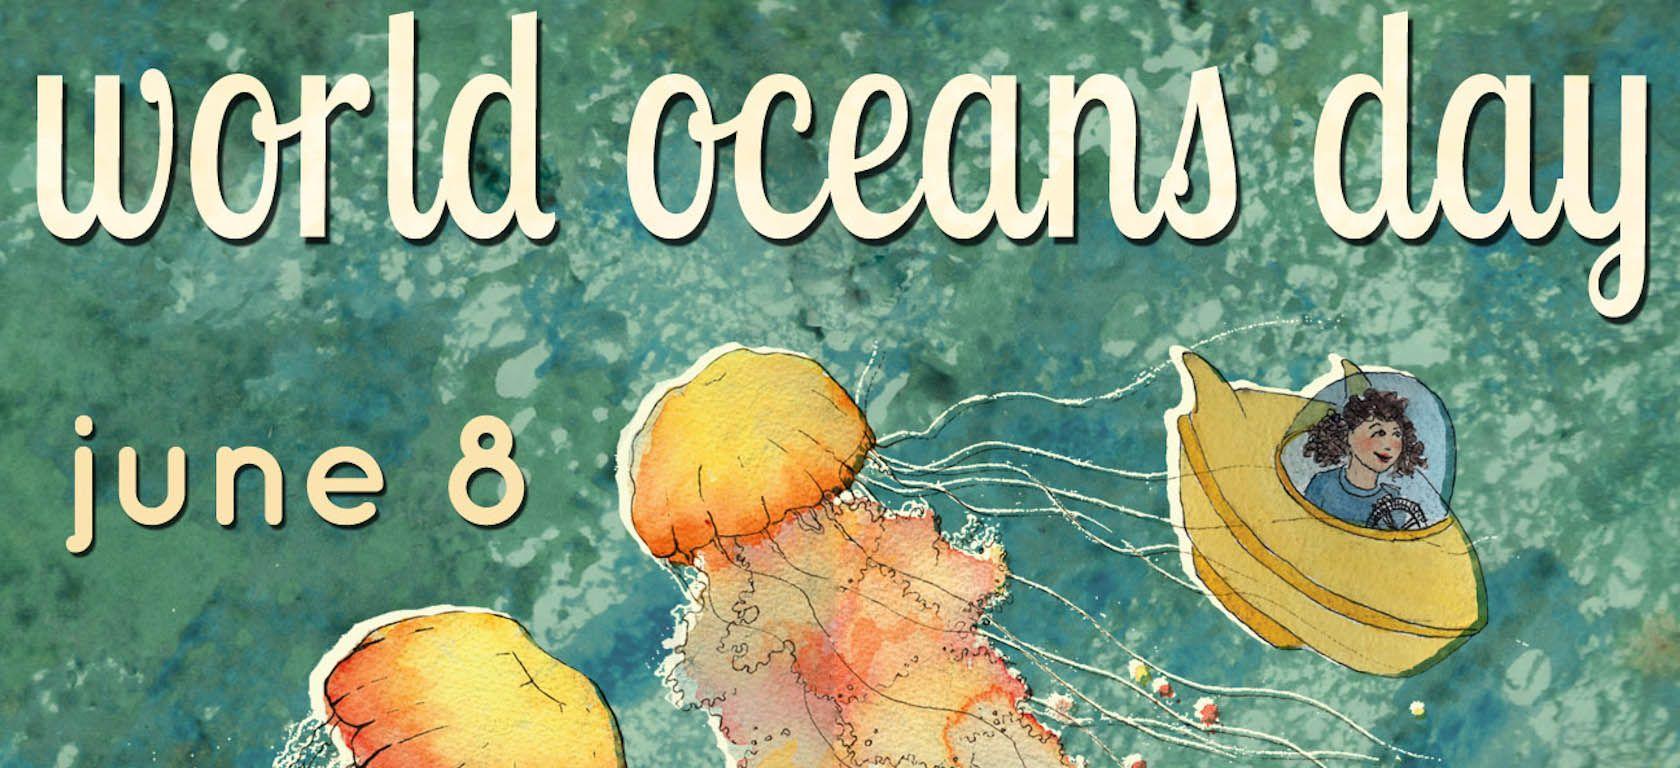 Best World Ocean Day Wish Picture And Image